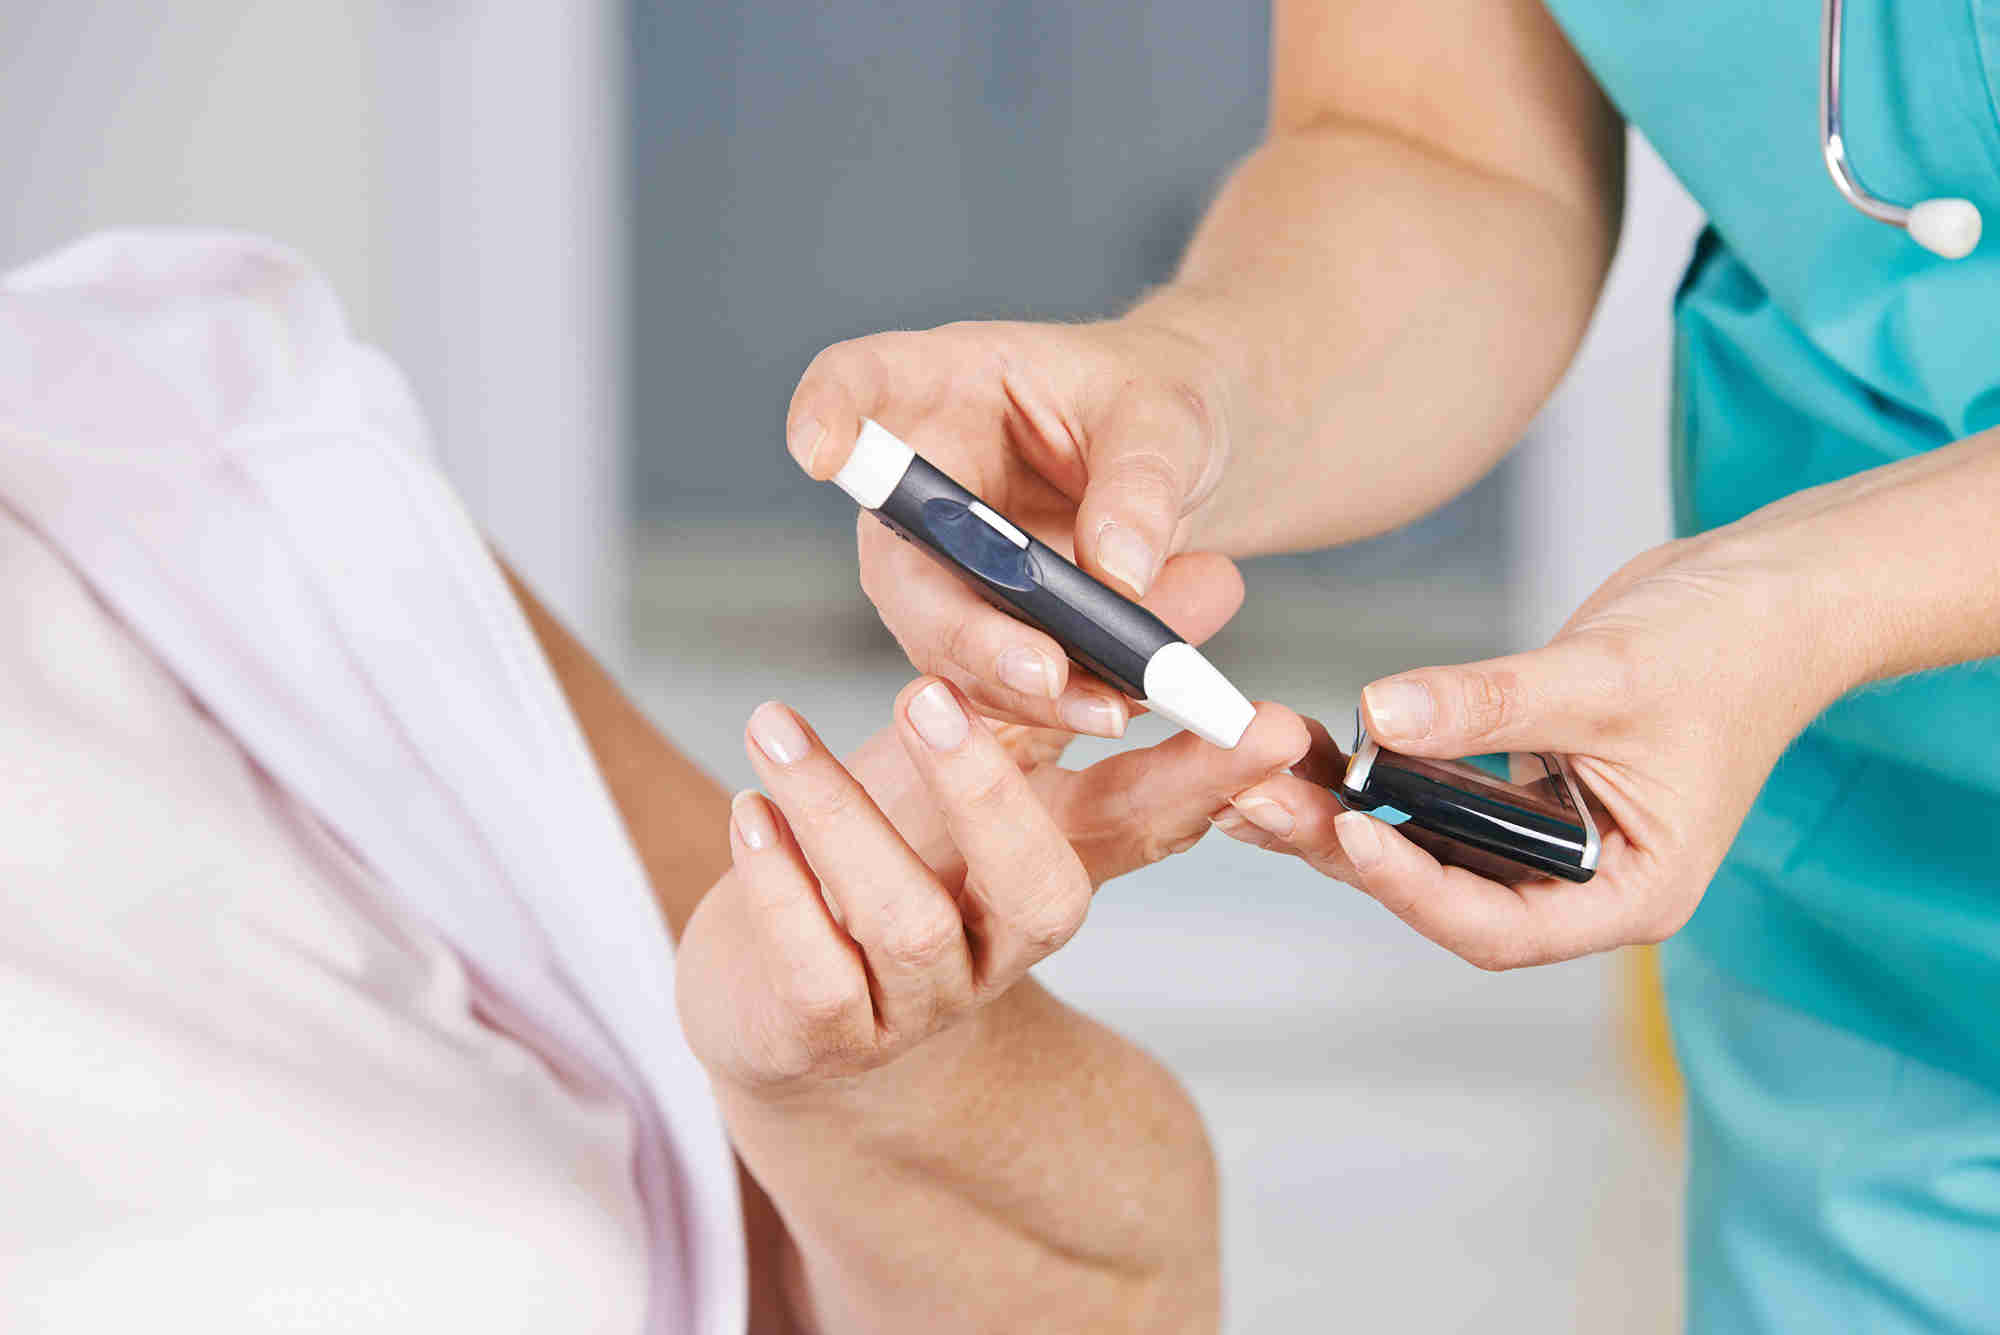 Image of adult having their blood glucose level tested